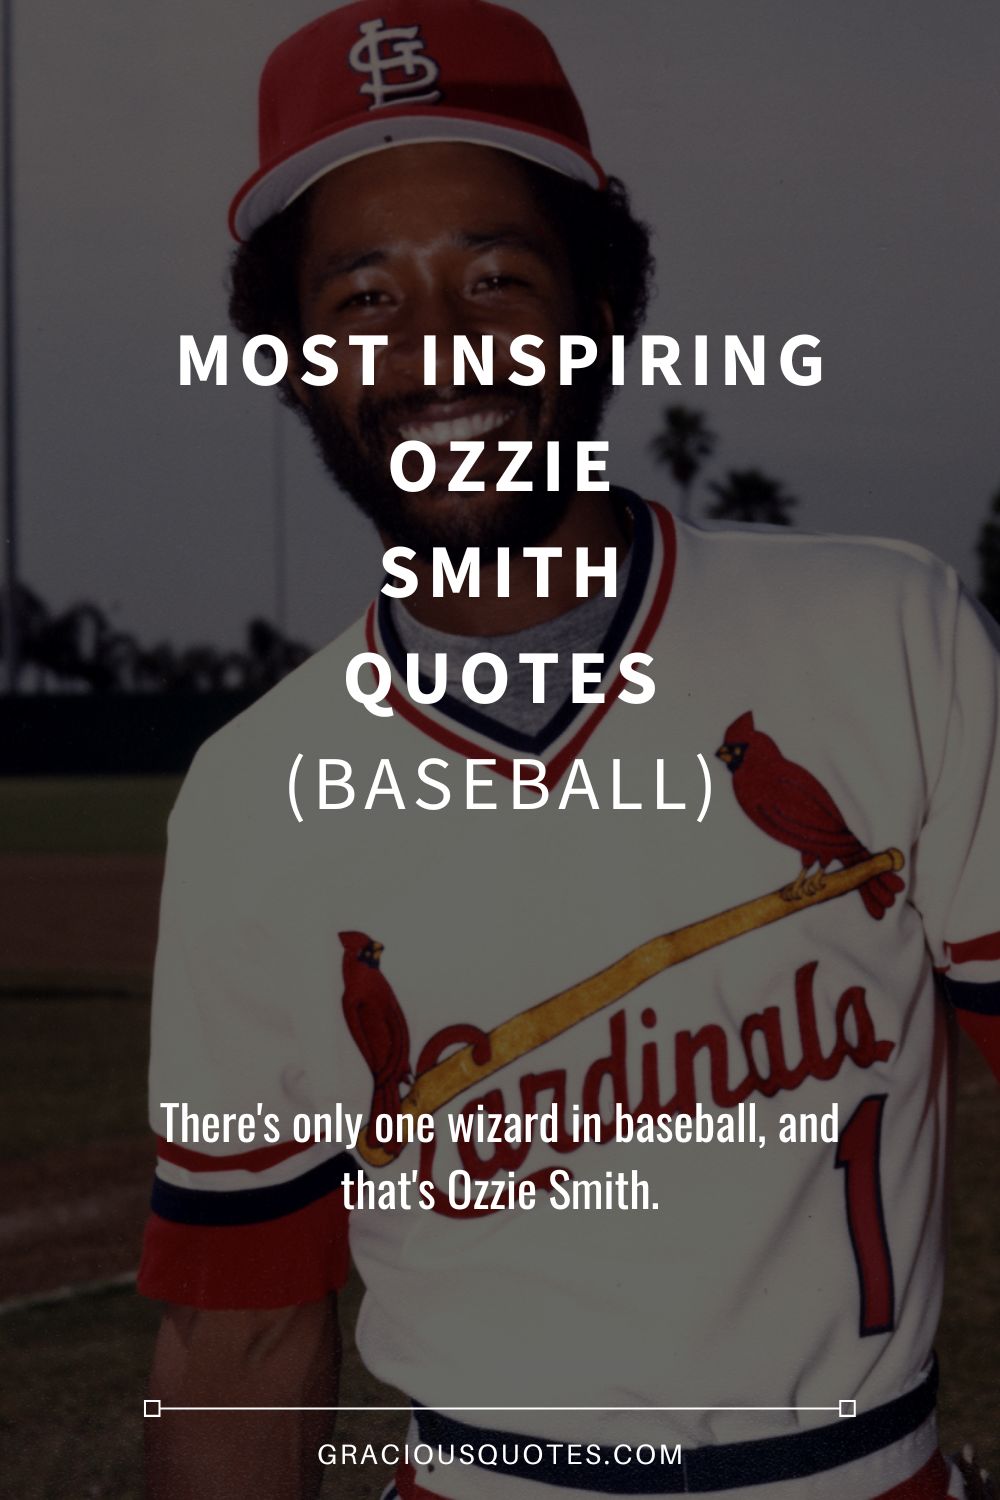 Most Inspiring Ozzie Smith Quotes (BASEBALL) - Gracious Quotes